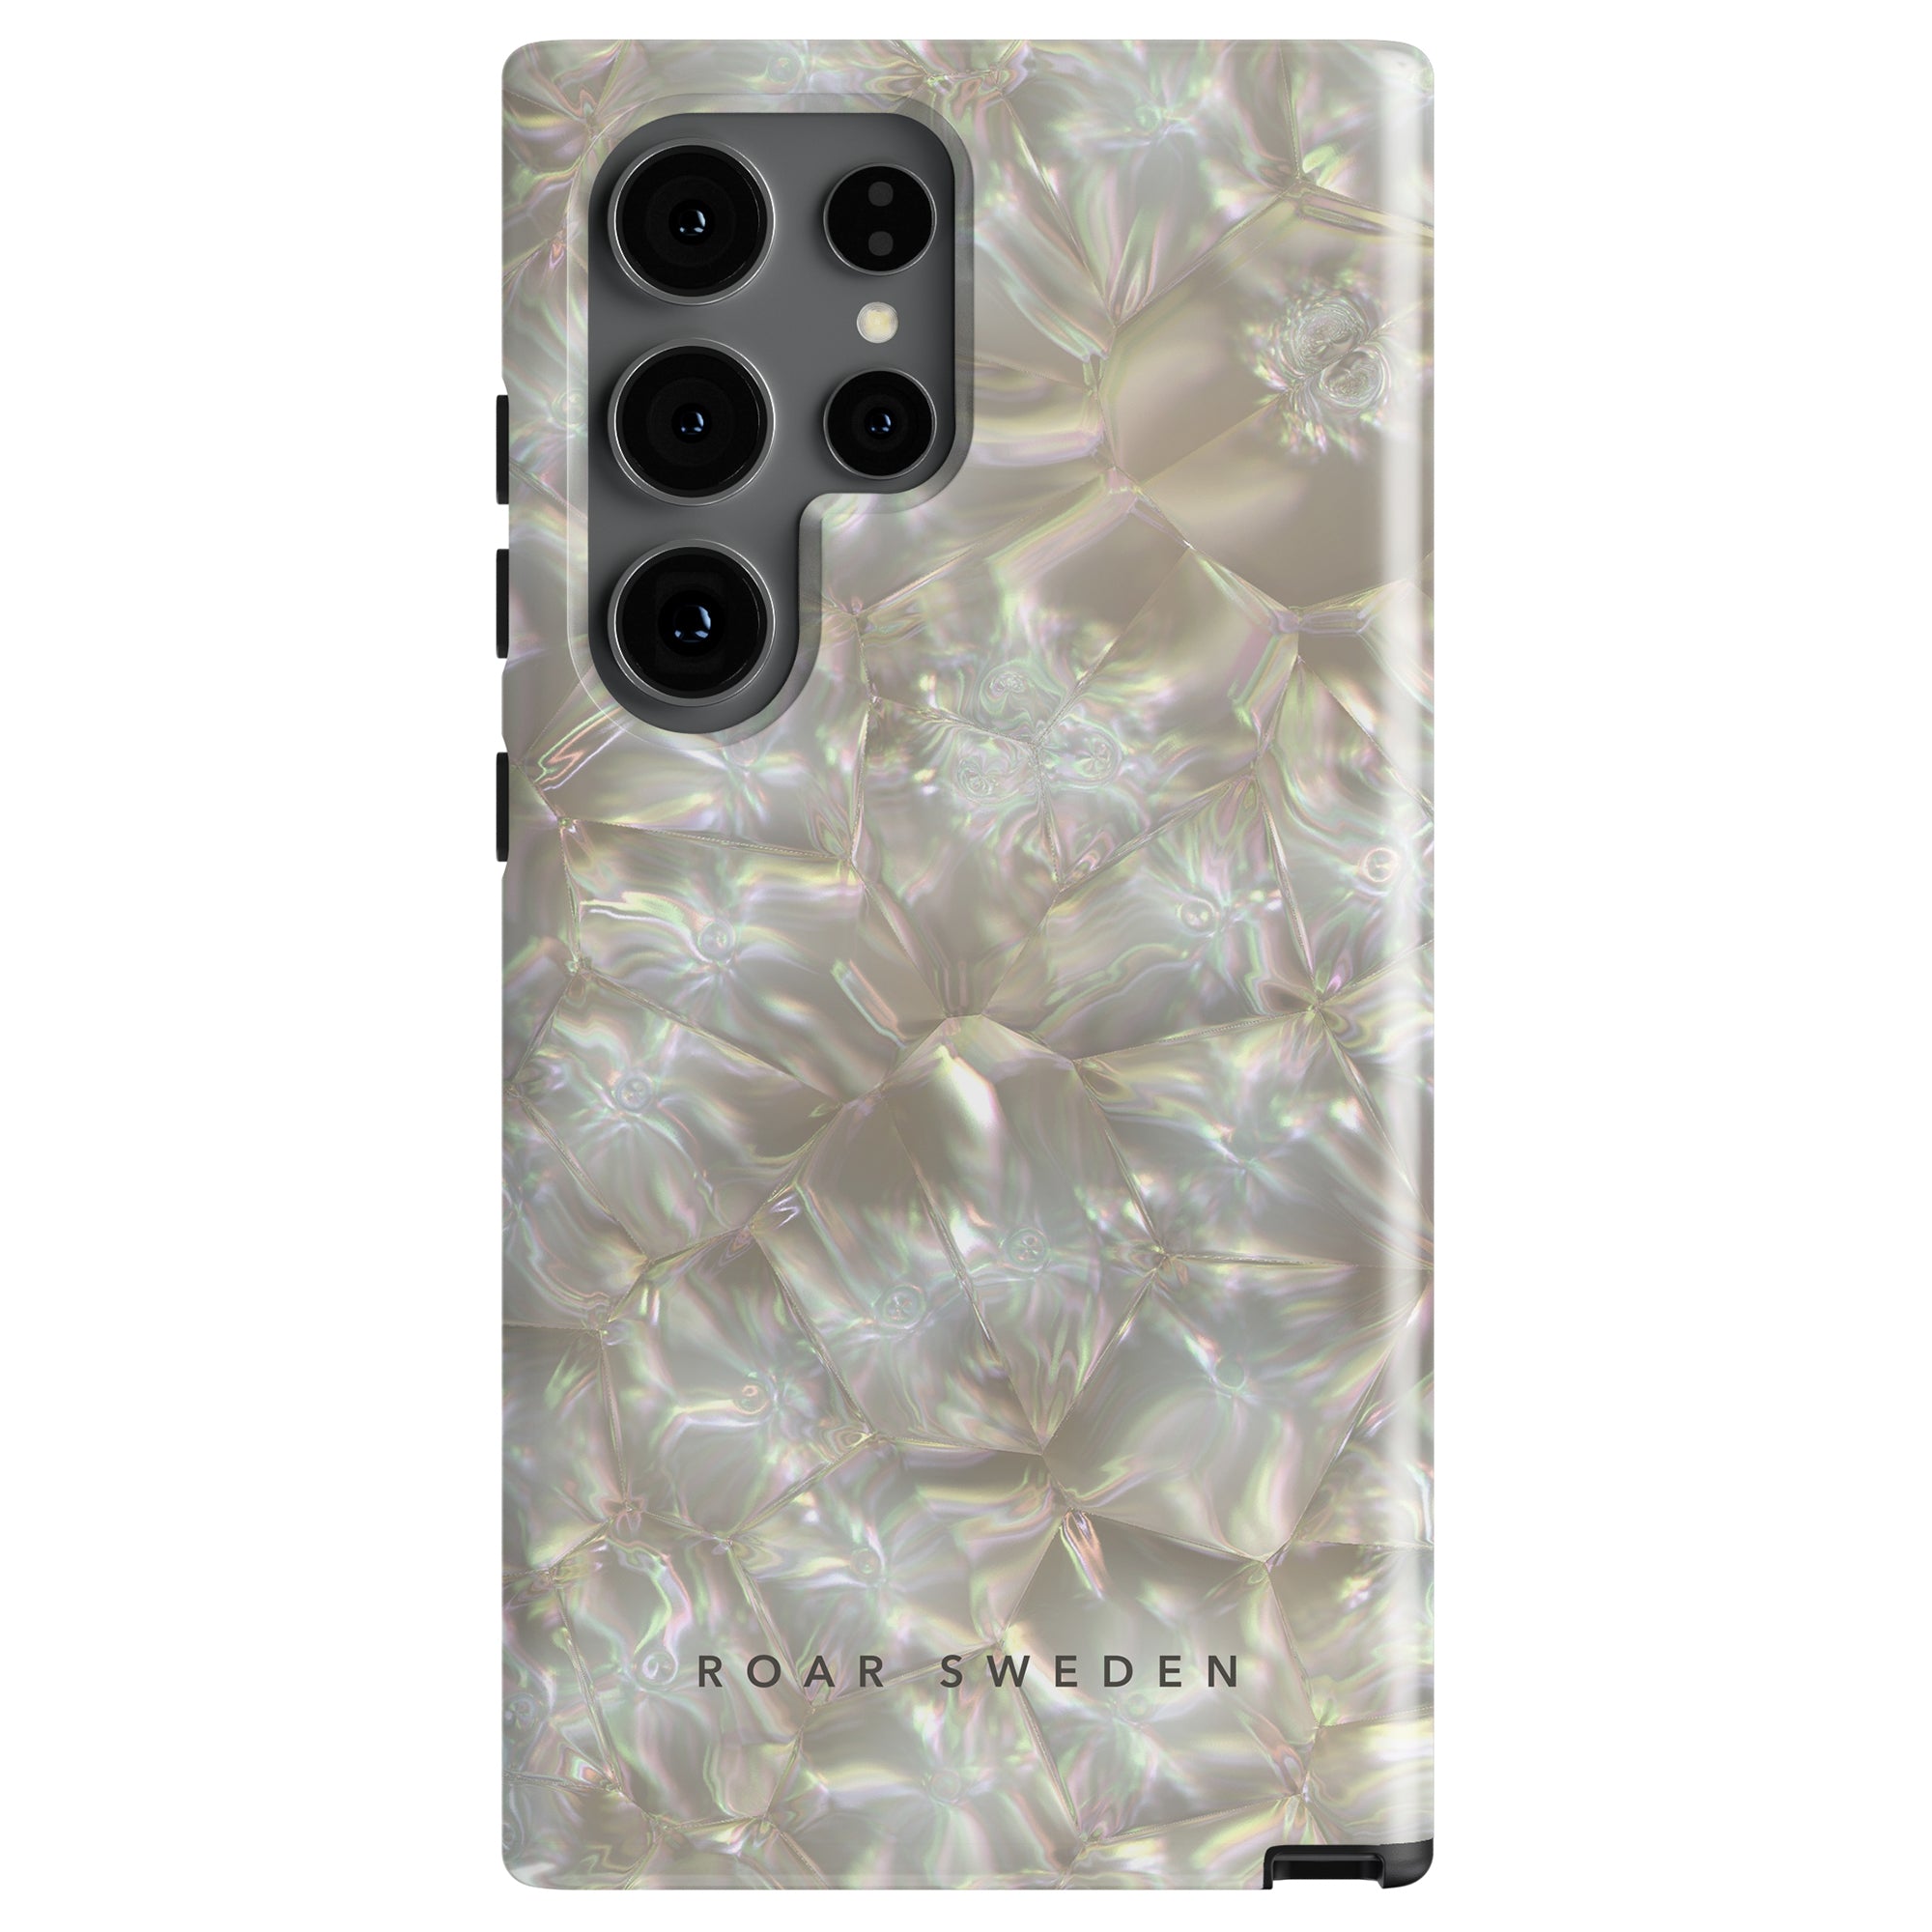 A smartphone case with a textured, iridescent design from the Pearls - Tough Case Collection and multiple camera cutouts, labeled "ideal of sweden".